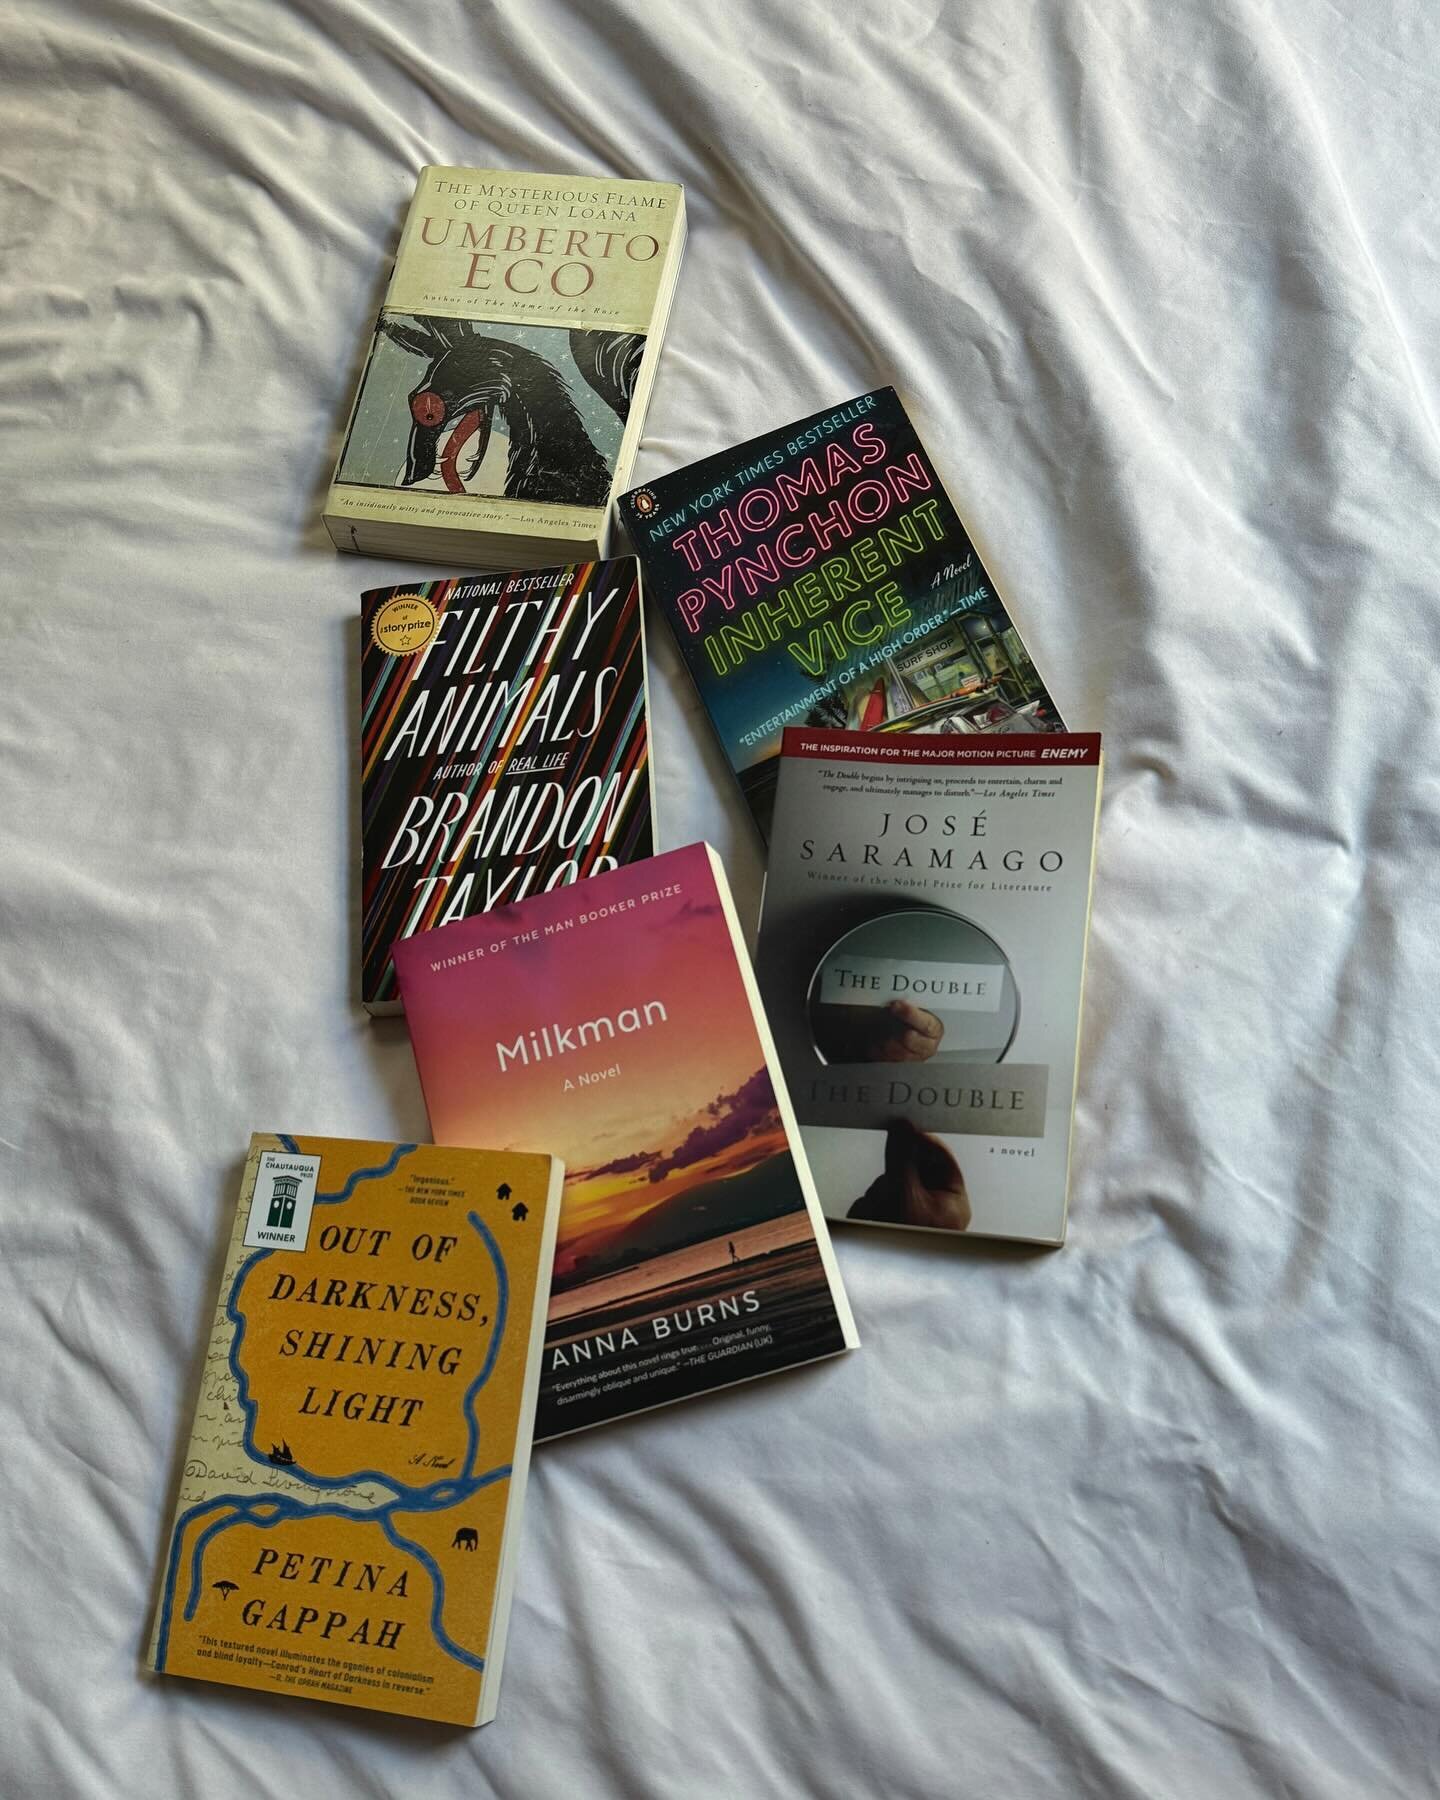 New York on a bright sunny weekend drives you completely nuts. I blame this city for my pauperism and book hoarding addiction! In this immense isolation there is at least solitude, some new (used) books, and a new pair of denims!

__________________
